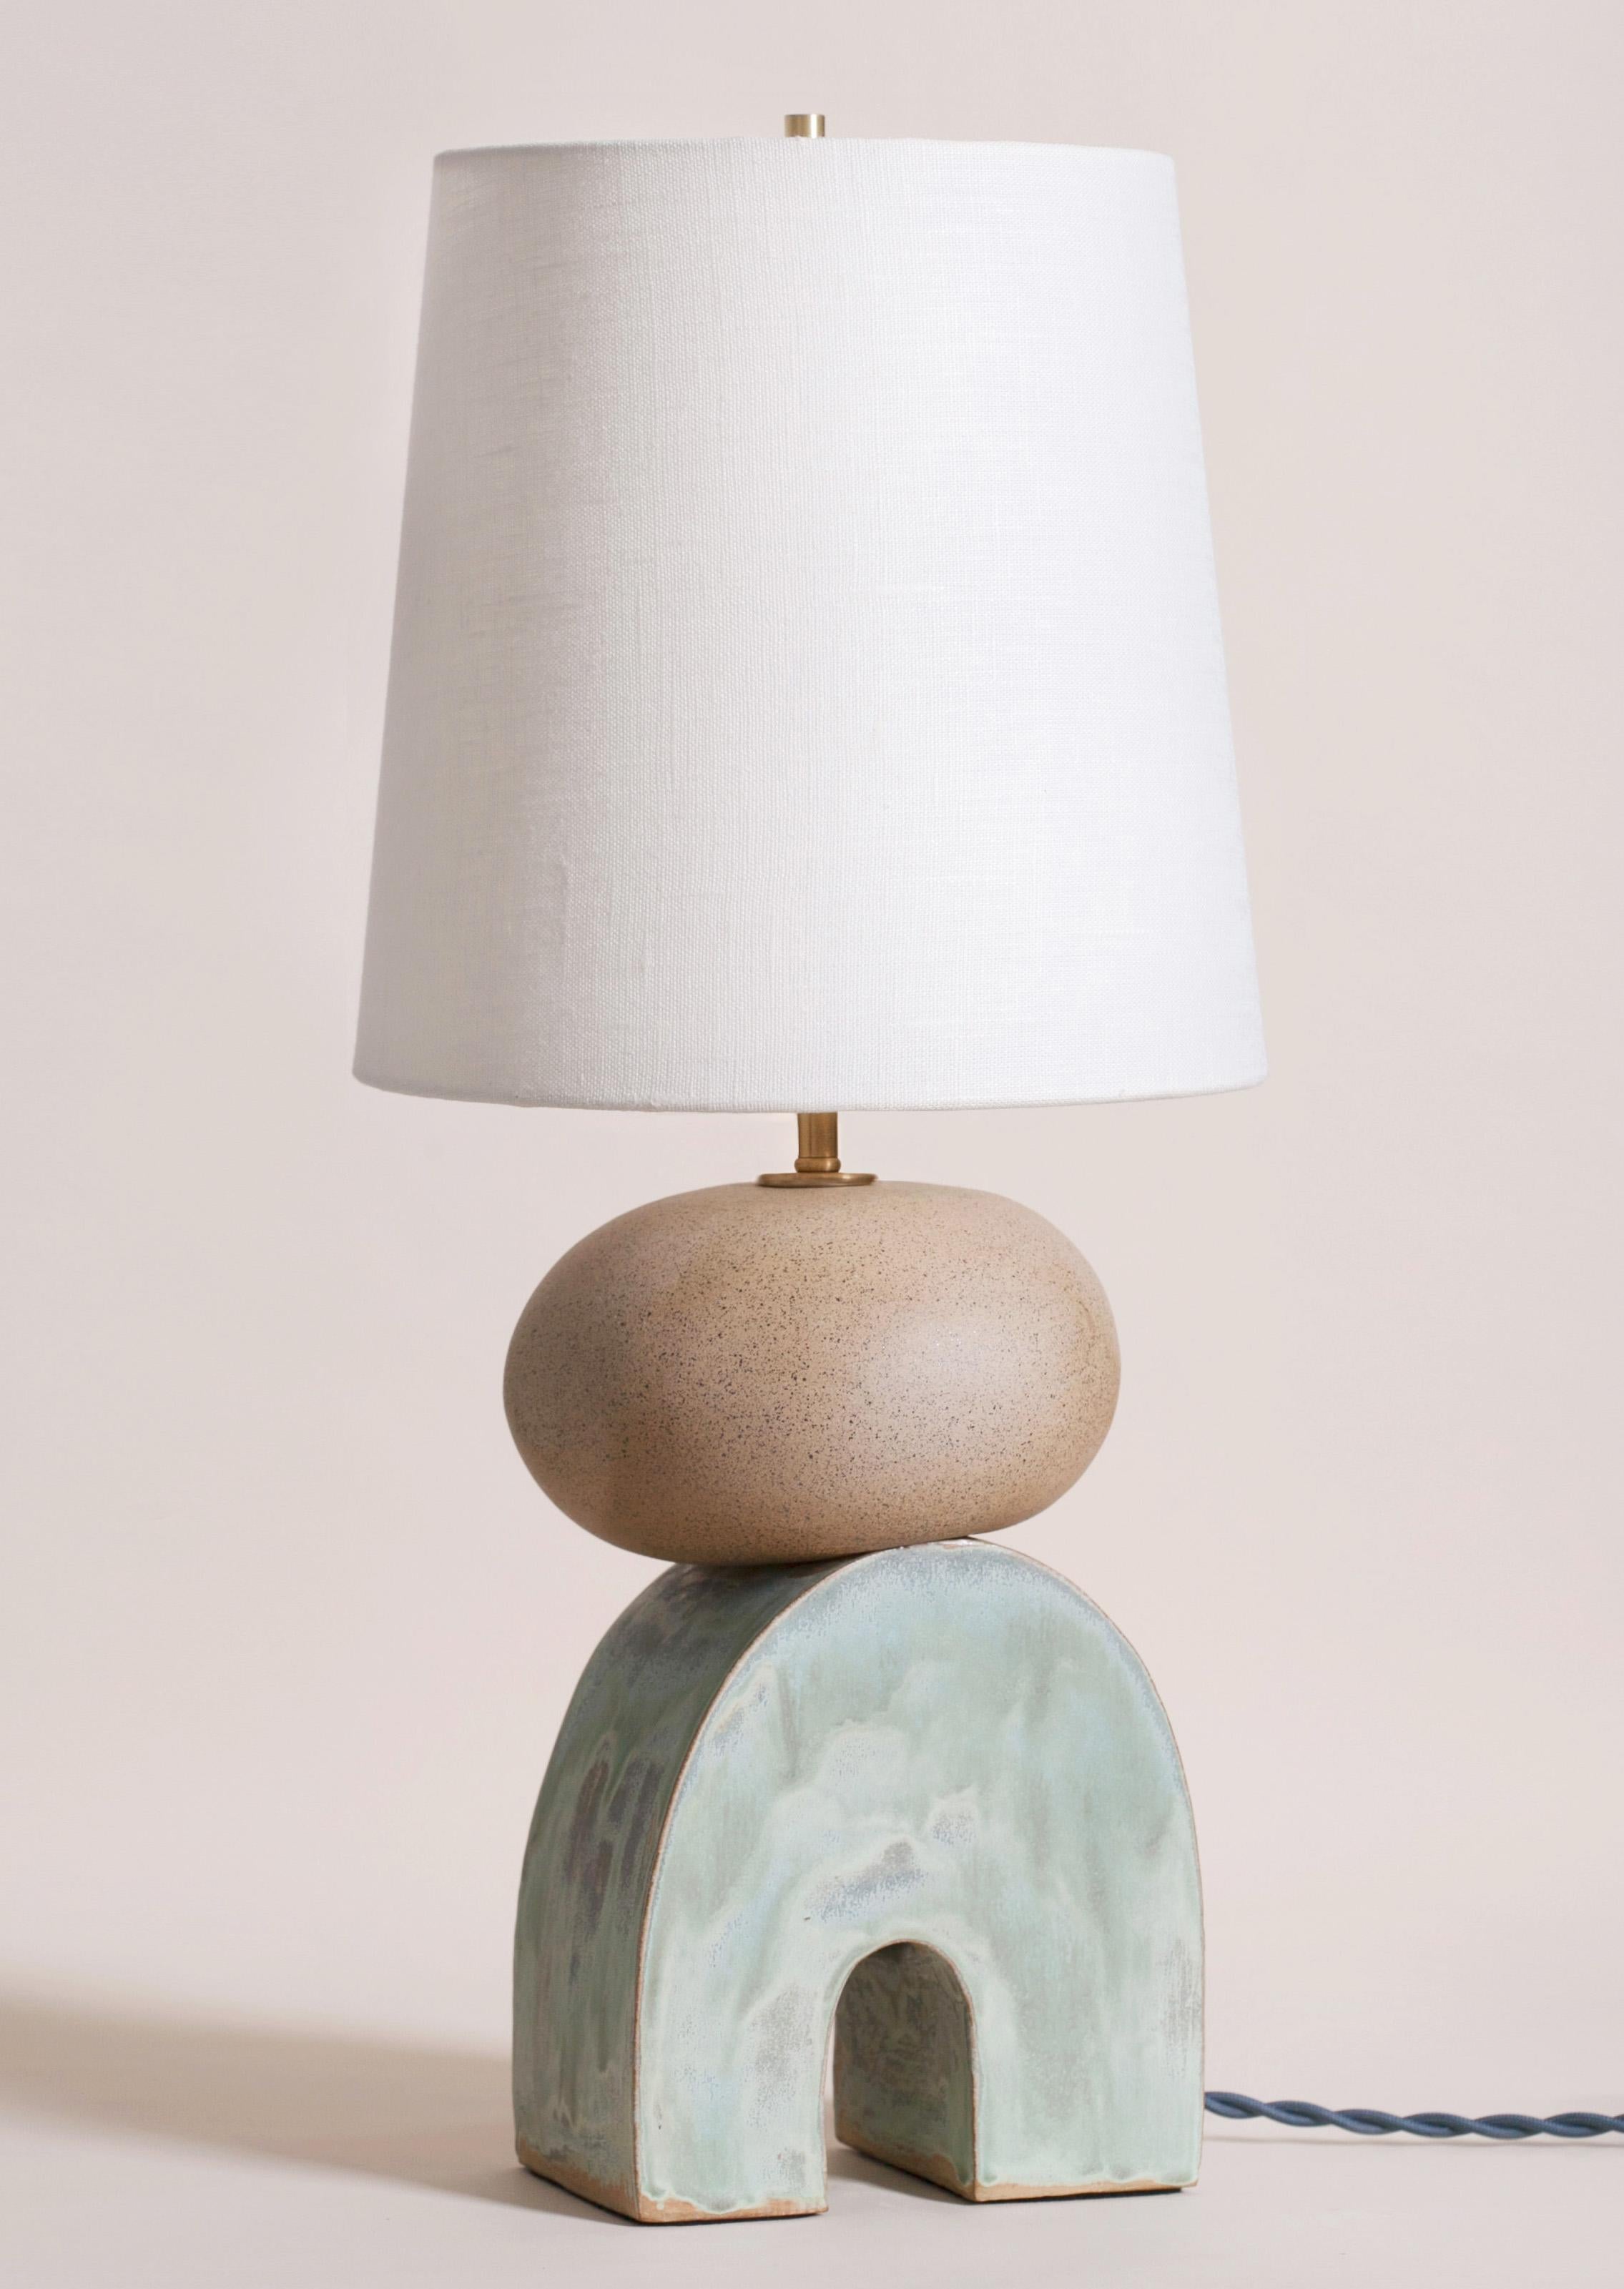 One of a kind ceramic lamp, thrown on the potters wheel and assembled by hand. The lamp base is comprised of two different clay bodies and features a raw, unglazed ceramic surface to highlight the texture of natural clay contrasted with a coppery